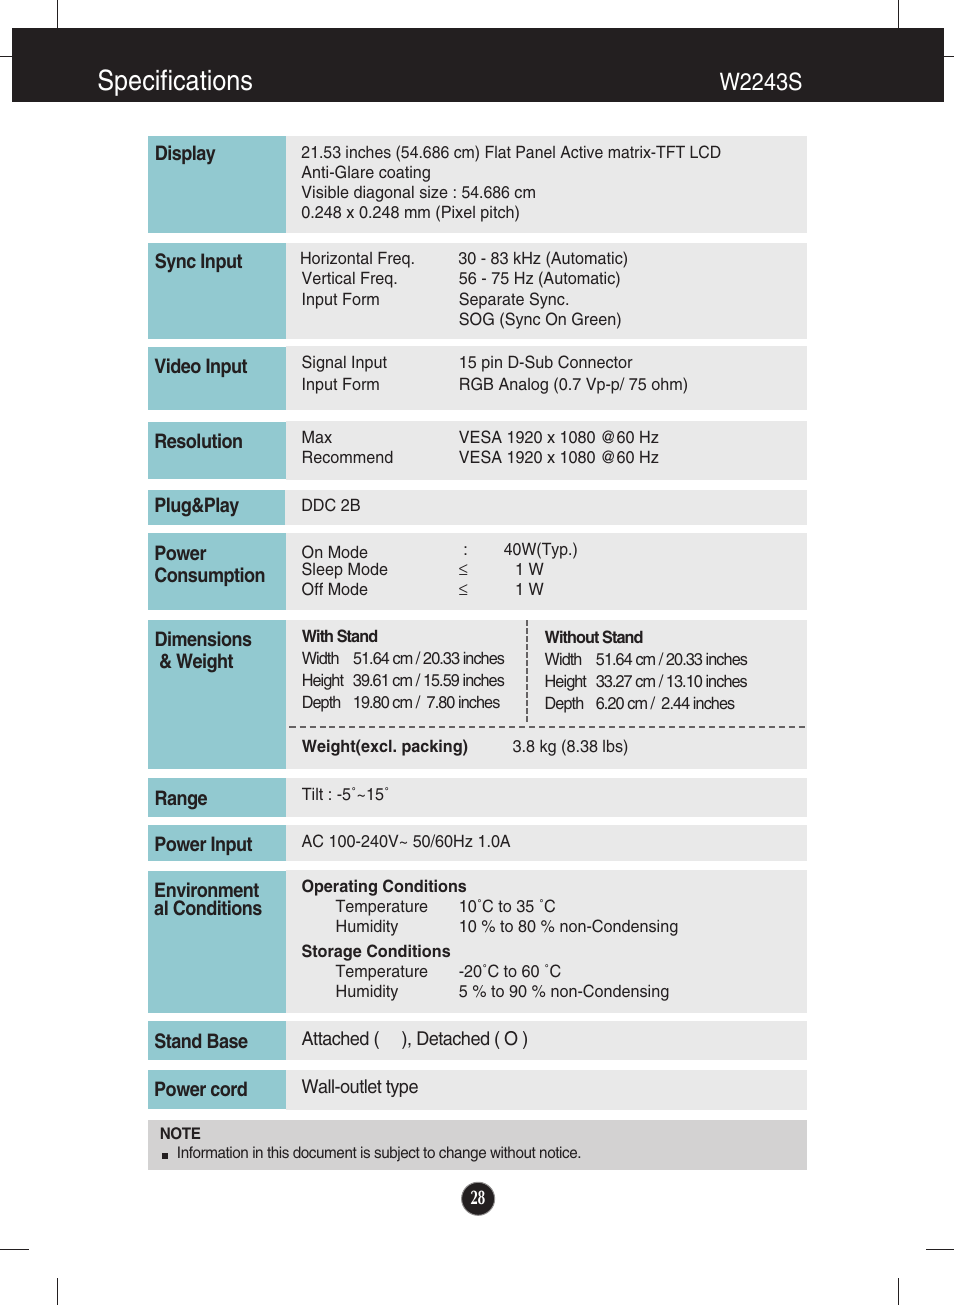 W2243s, Specifications | LG W1943TB-PF User Manual | Page 29 / 34